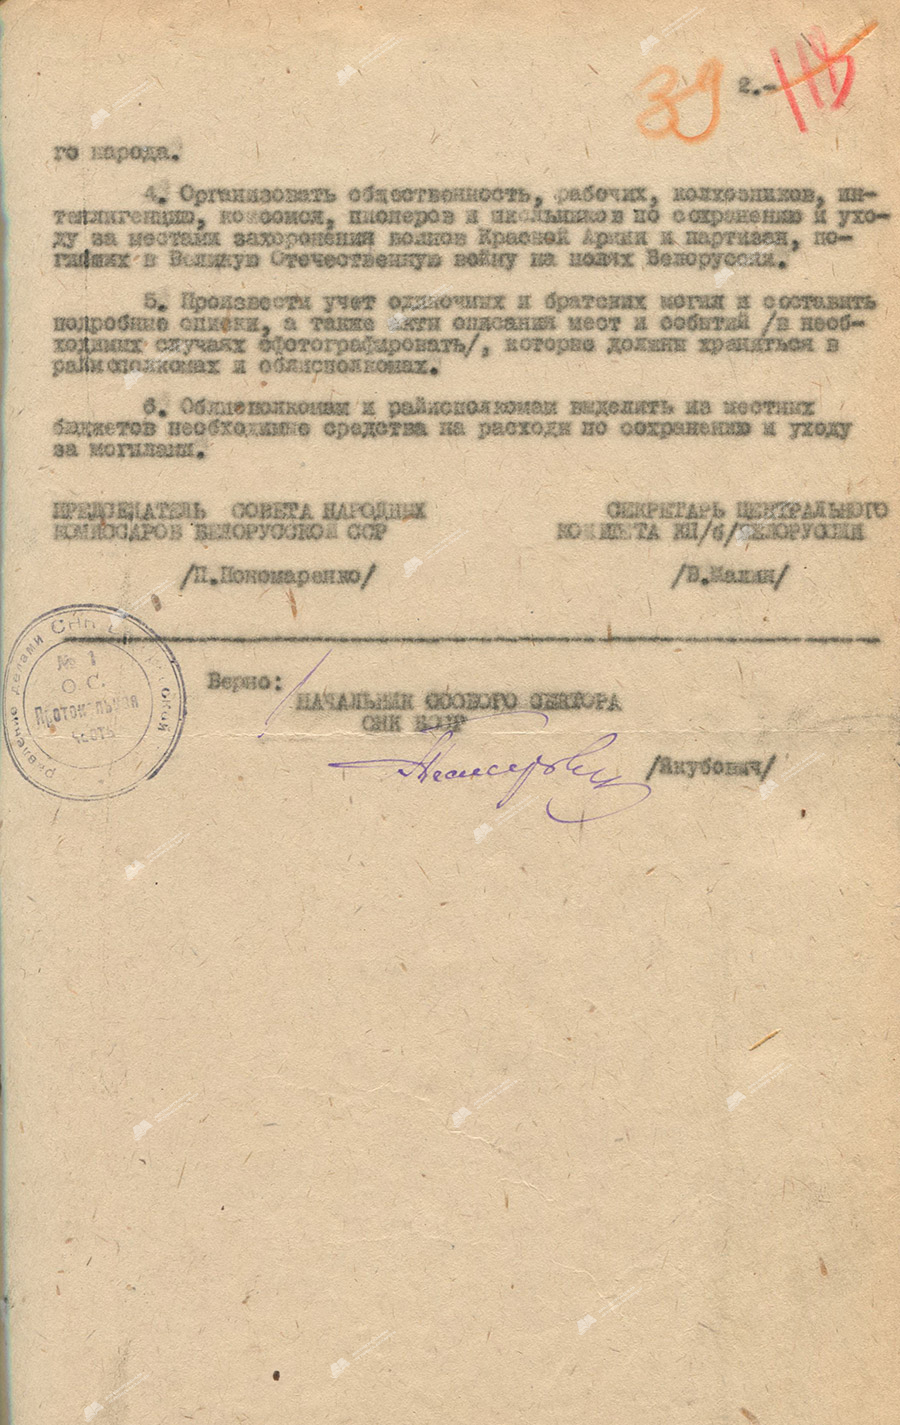 Resolution of the Council of People’s Commissars of the BSSR and the Central Committee of the Communist Party (Bolsheviks) of Belarus «On the preservation and care of the burial sites of Red Army soldiers and partisans who died in the Great Patriotic War and were buried on the territory of the BSSR»-с. 1